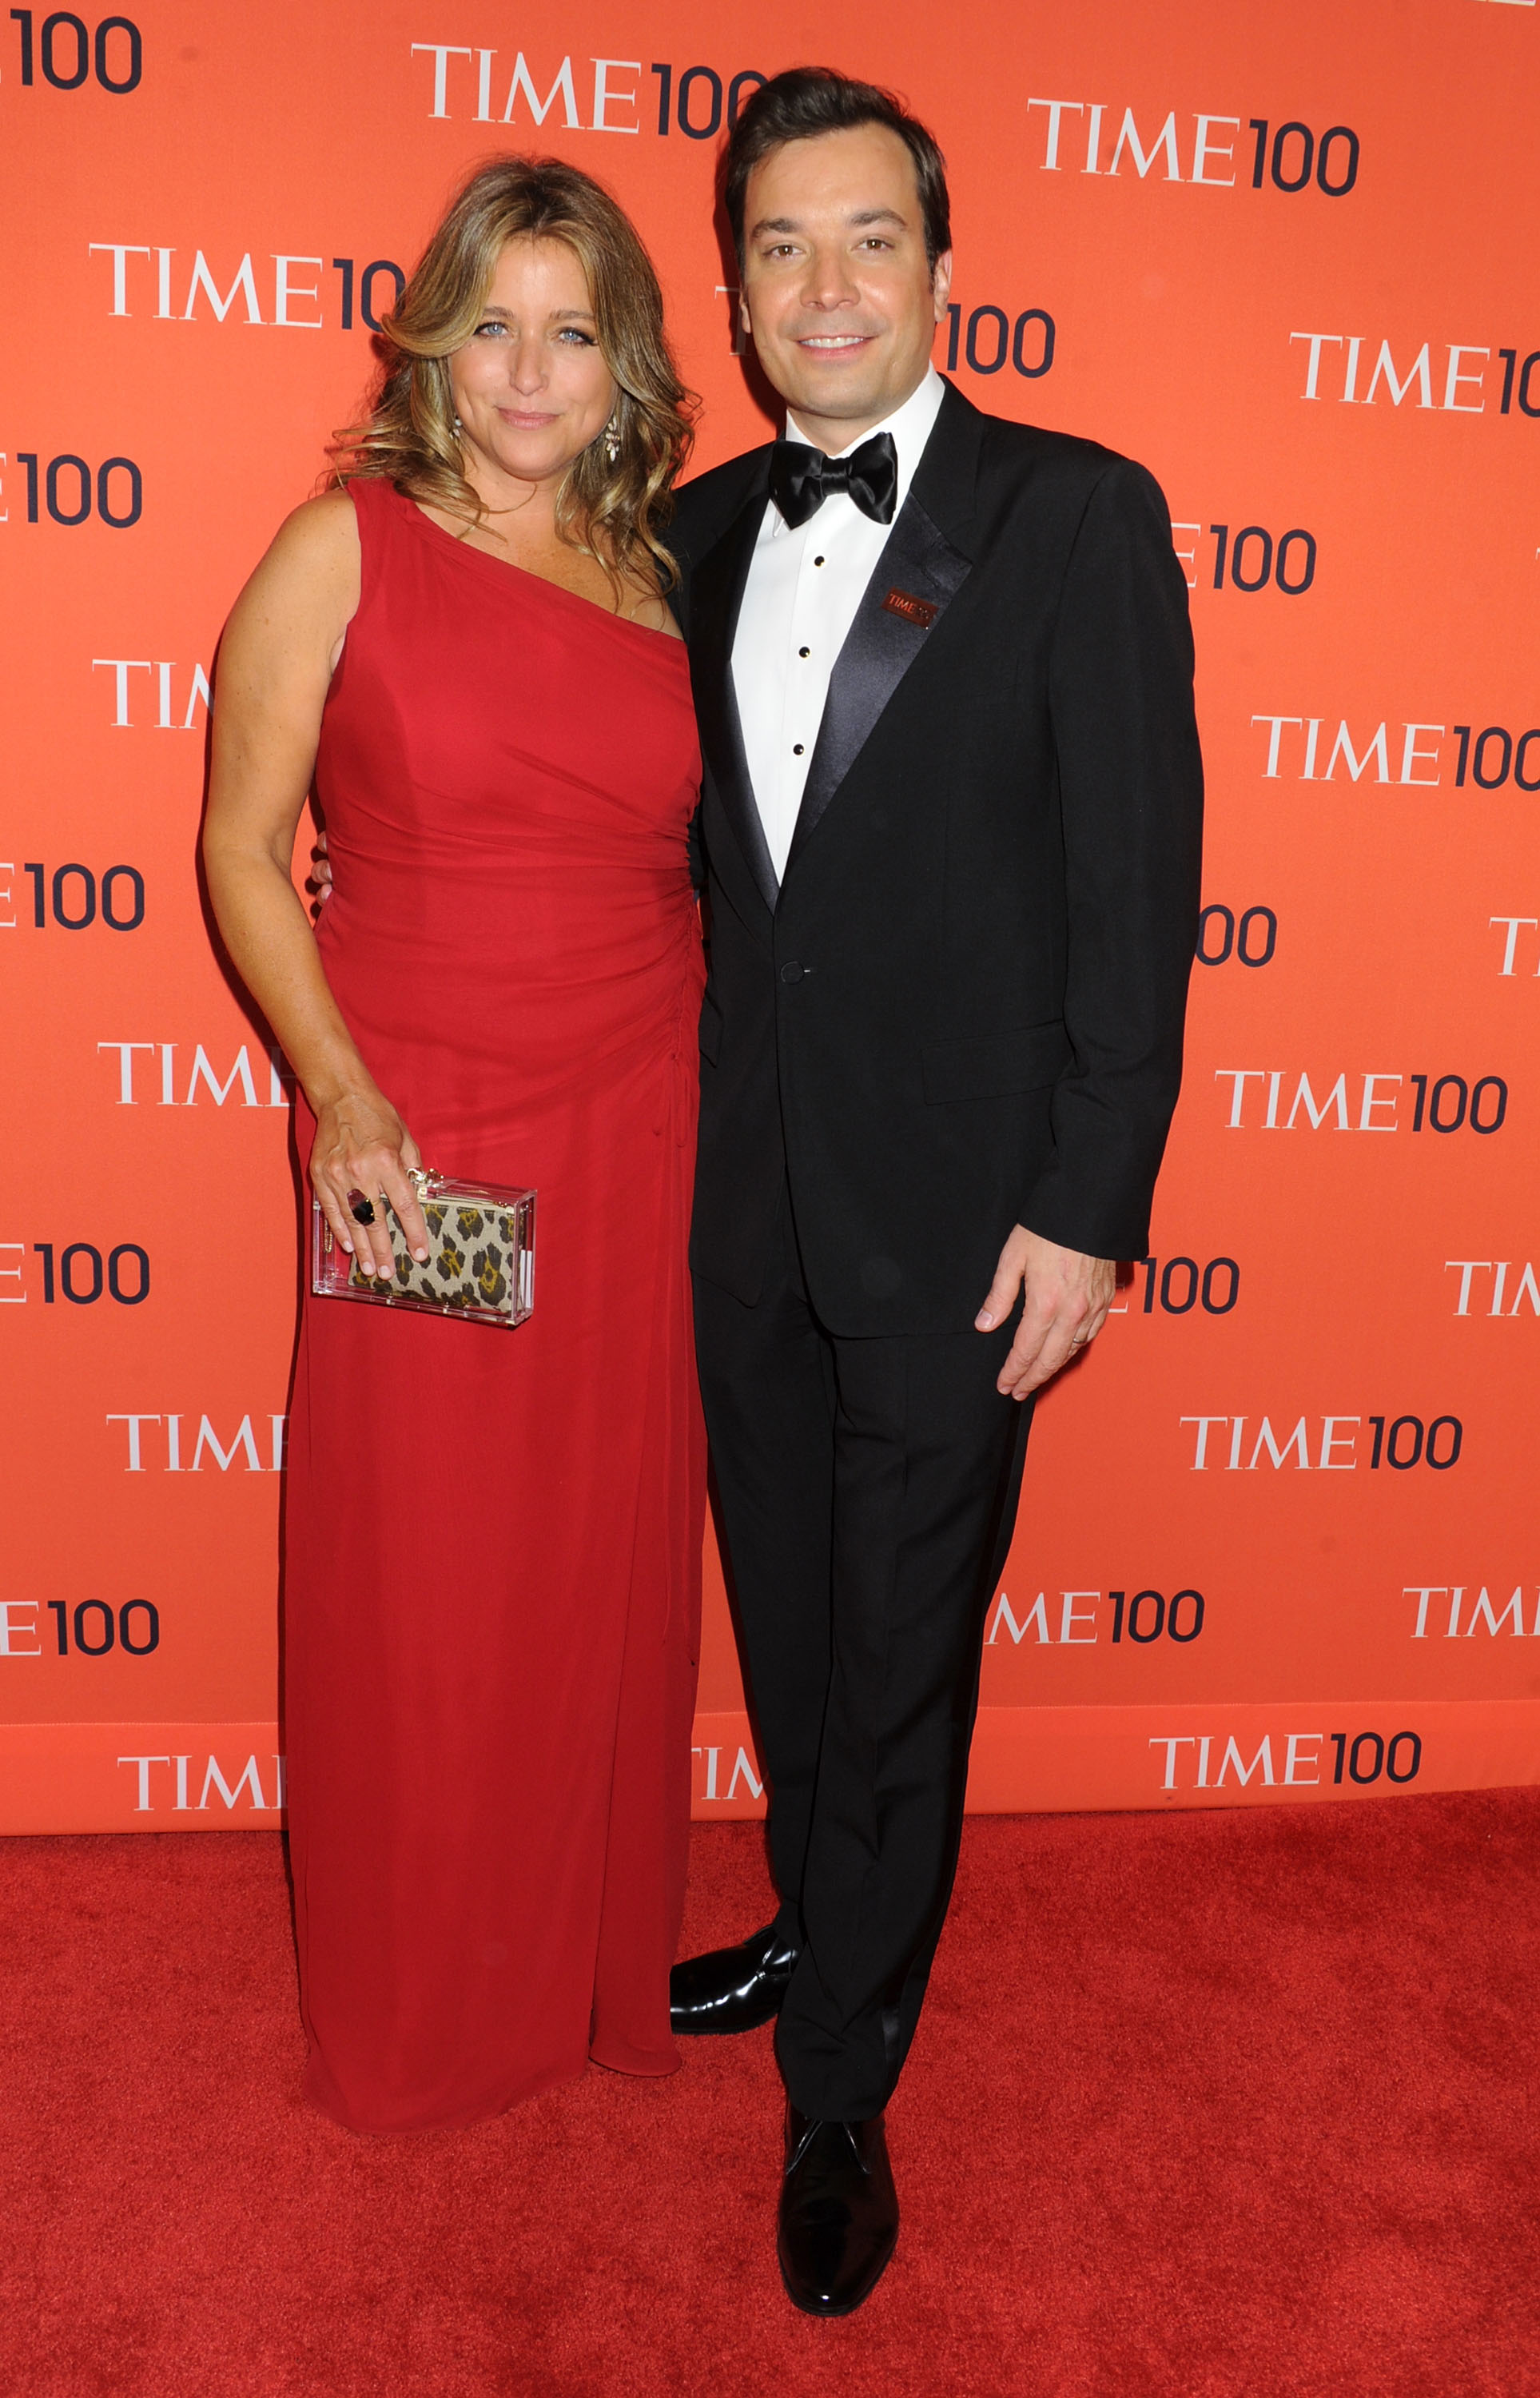 TV host Jimmy Fallon and Nancy Juvonen attend the 2013 Time 100 Gala at Frederick P. Rose Hall, Jazz at Lincoln Center on April 23, 2013 in New York City.